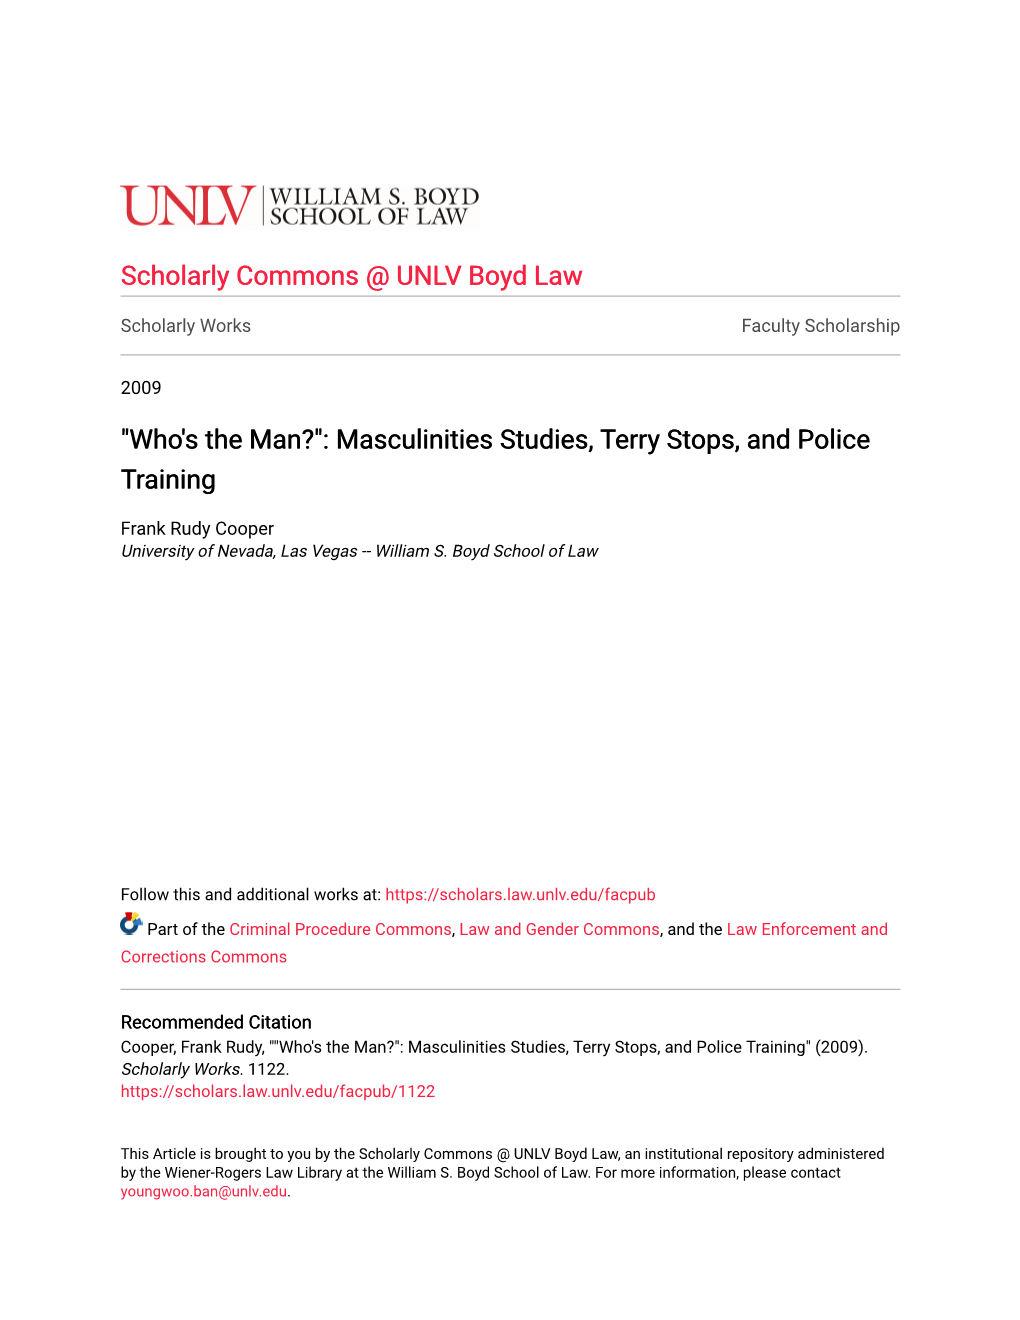 Masculinities Studies, Terry Stops, and Police Training